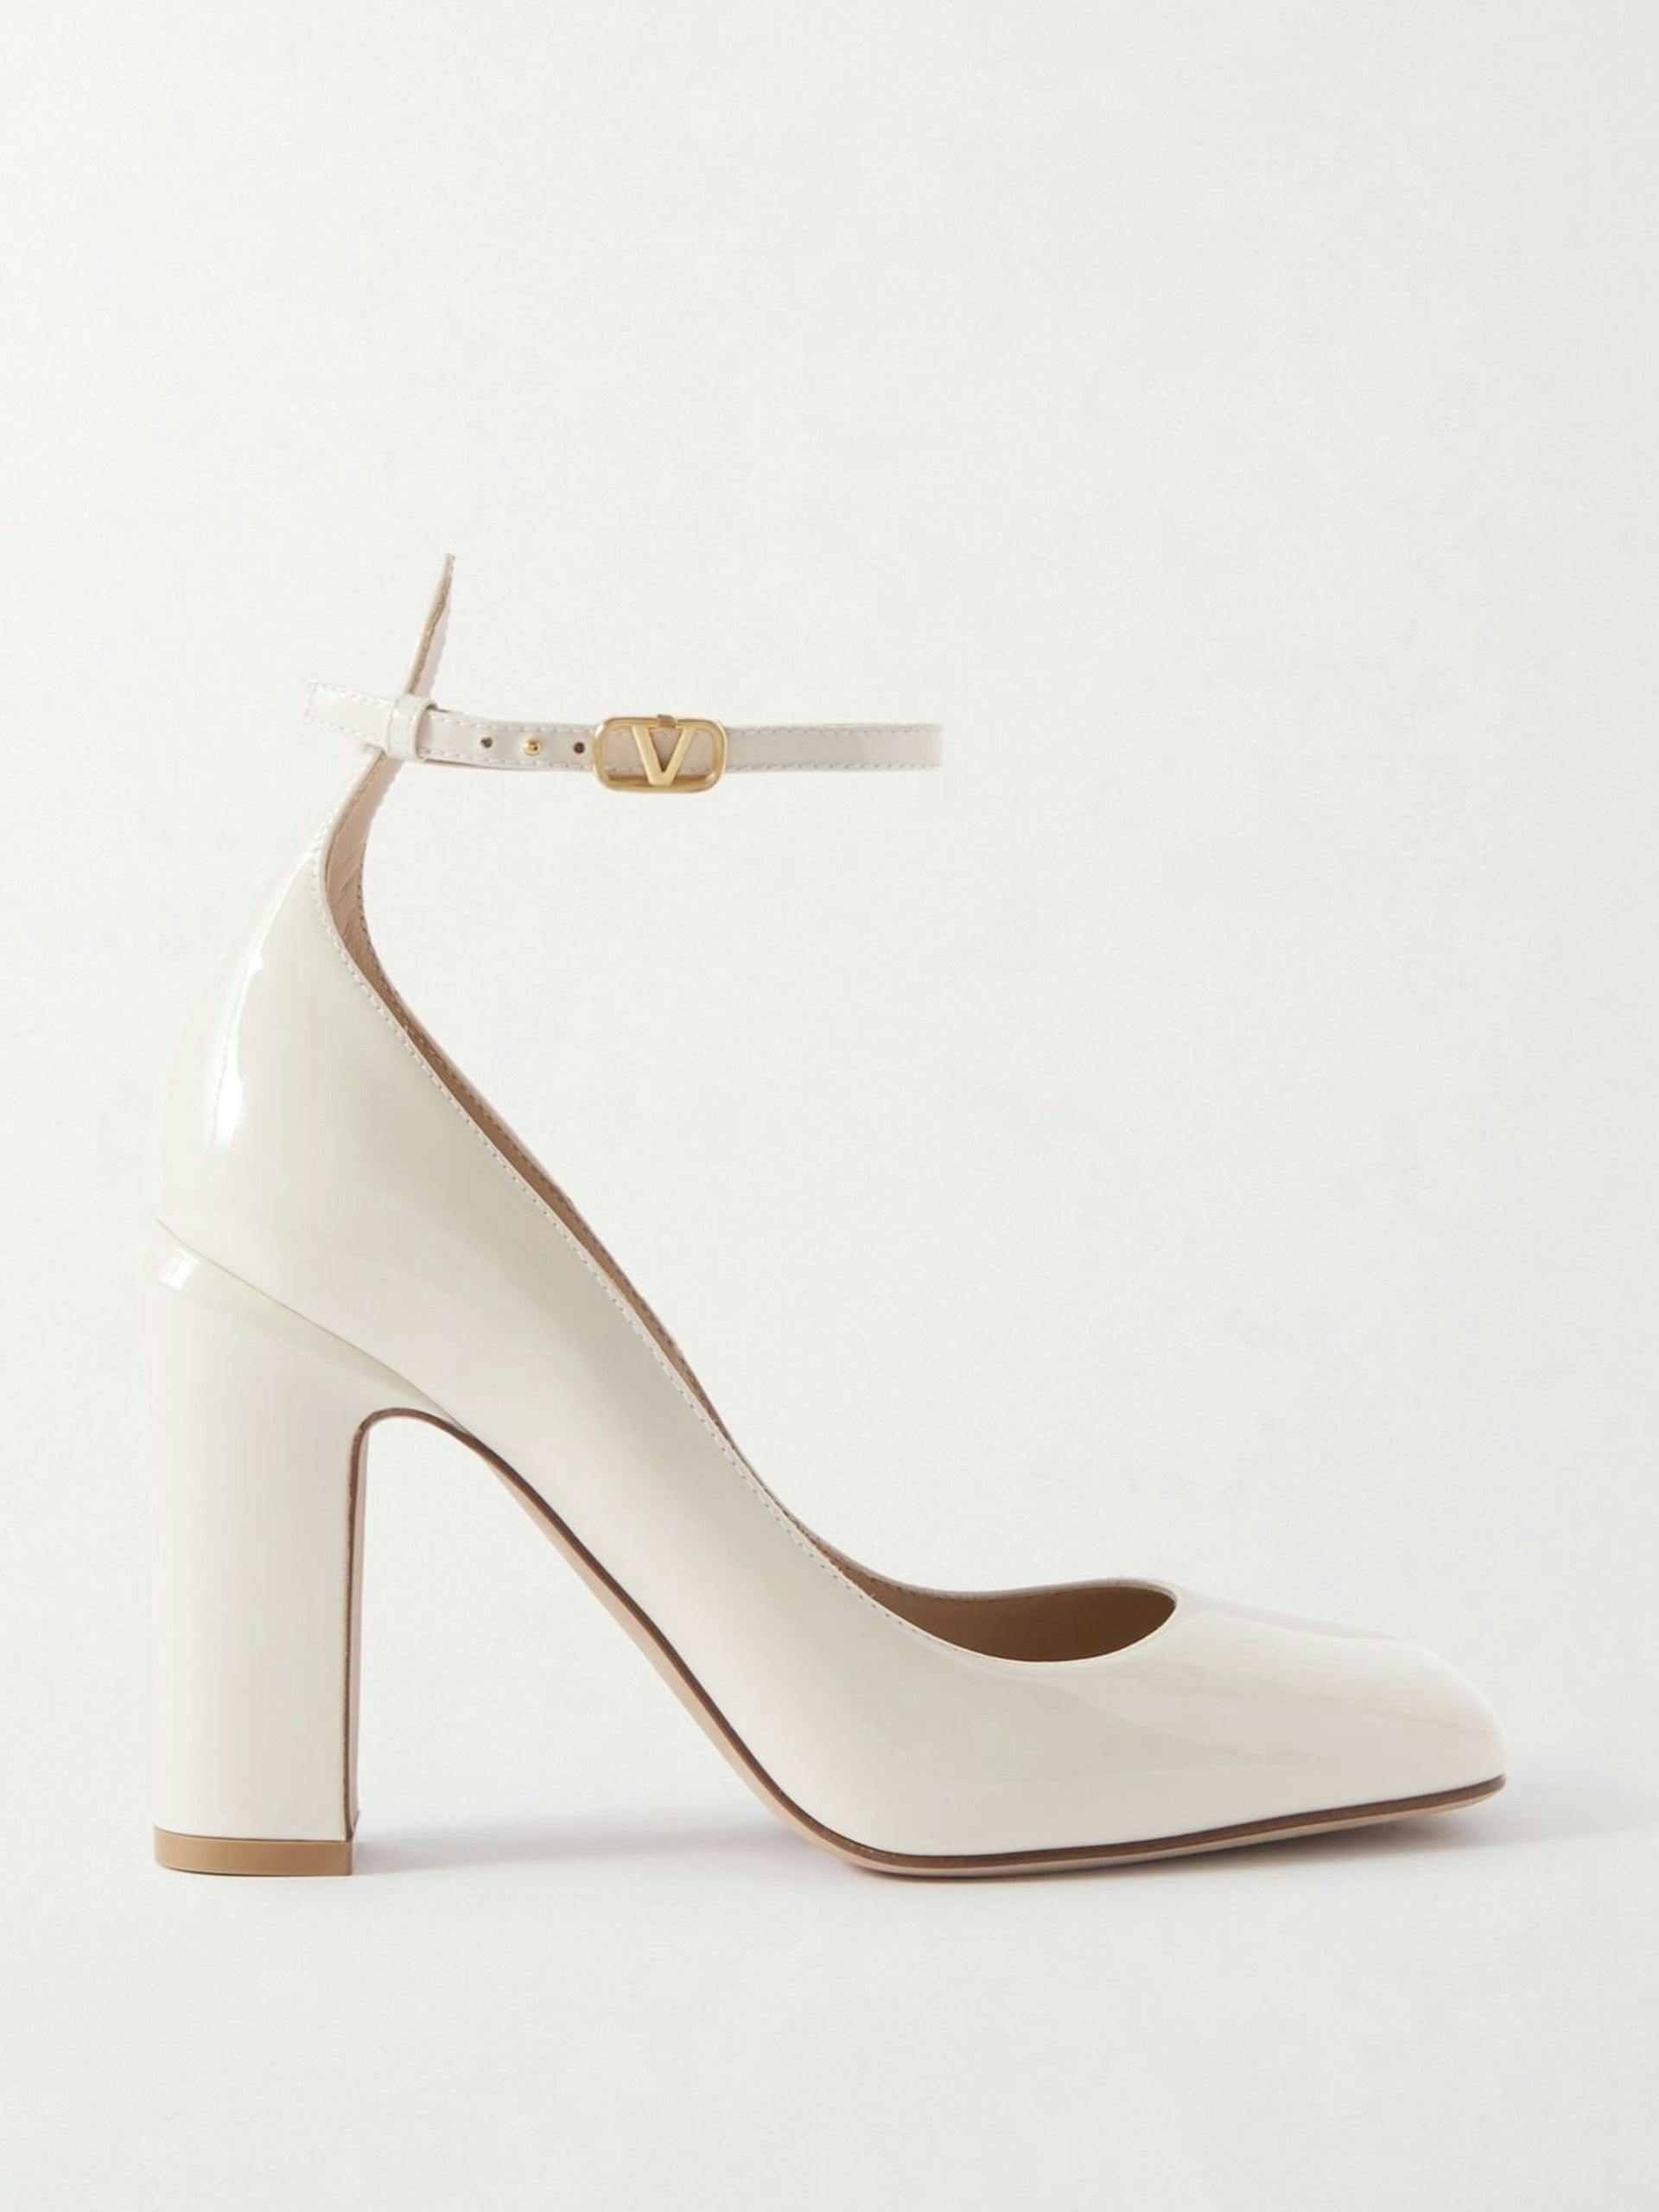 White patent leather heels